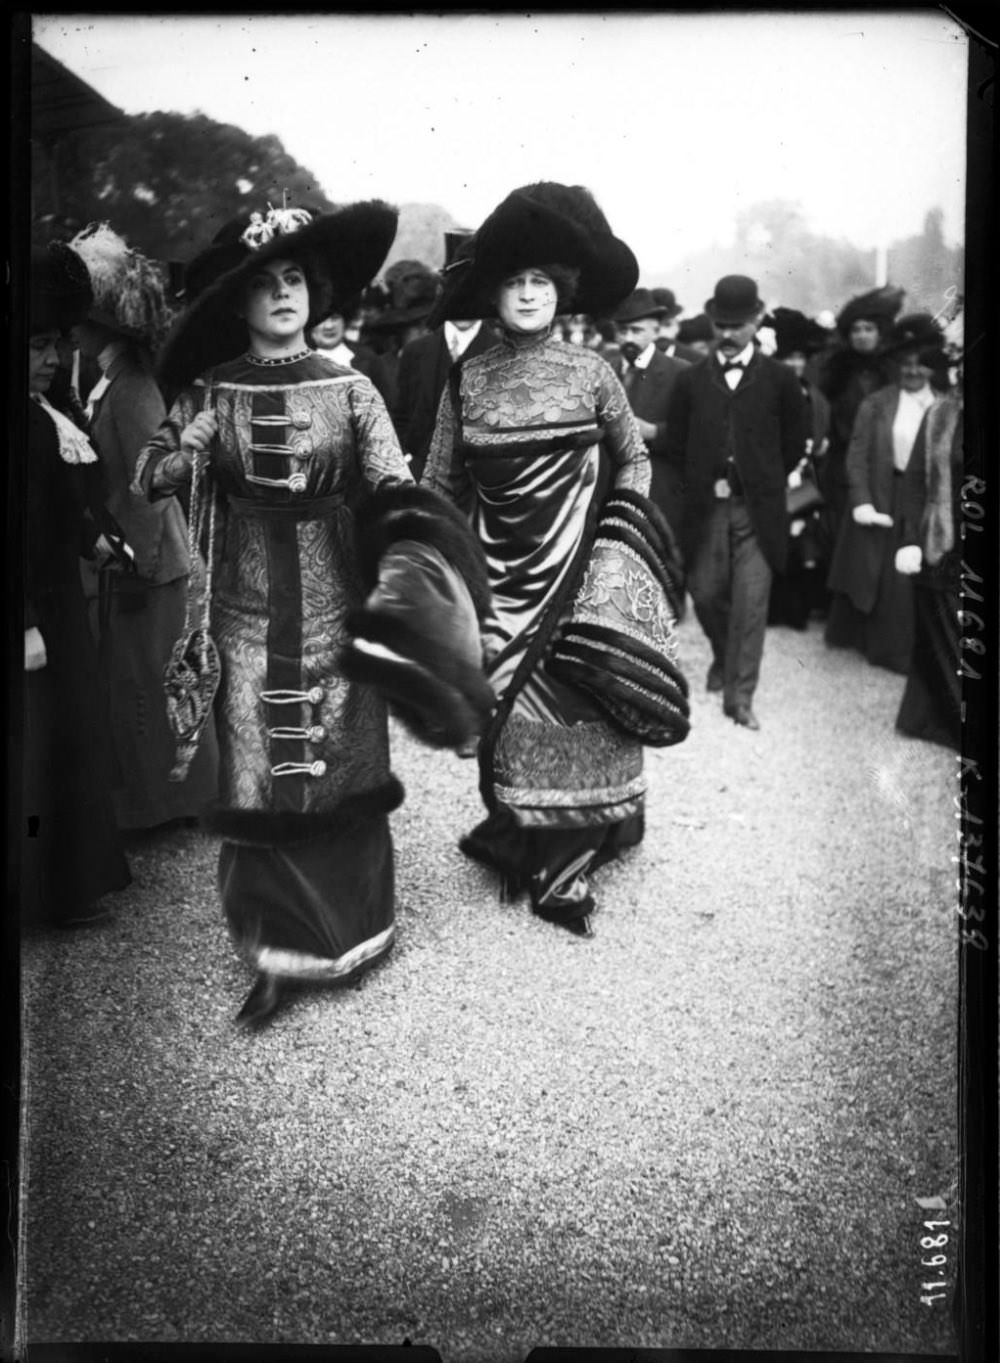 2 Men dressed as women showing off some unique fashion in Paris, France in 1910.